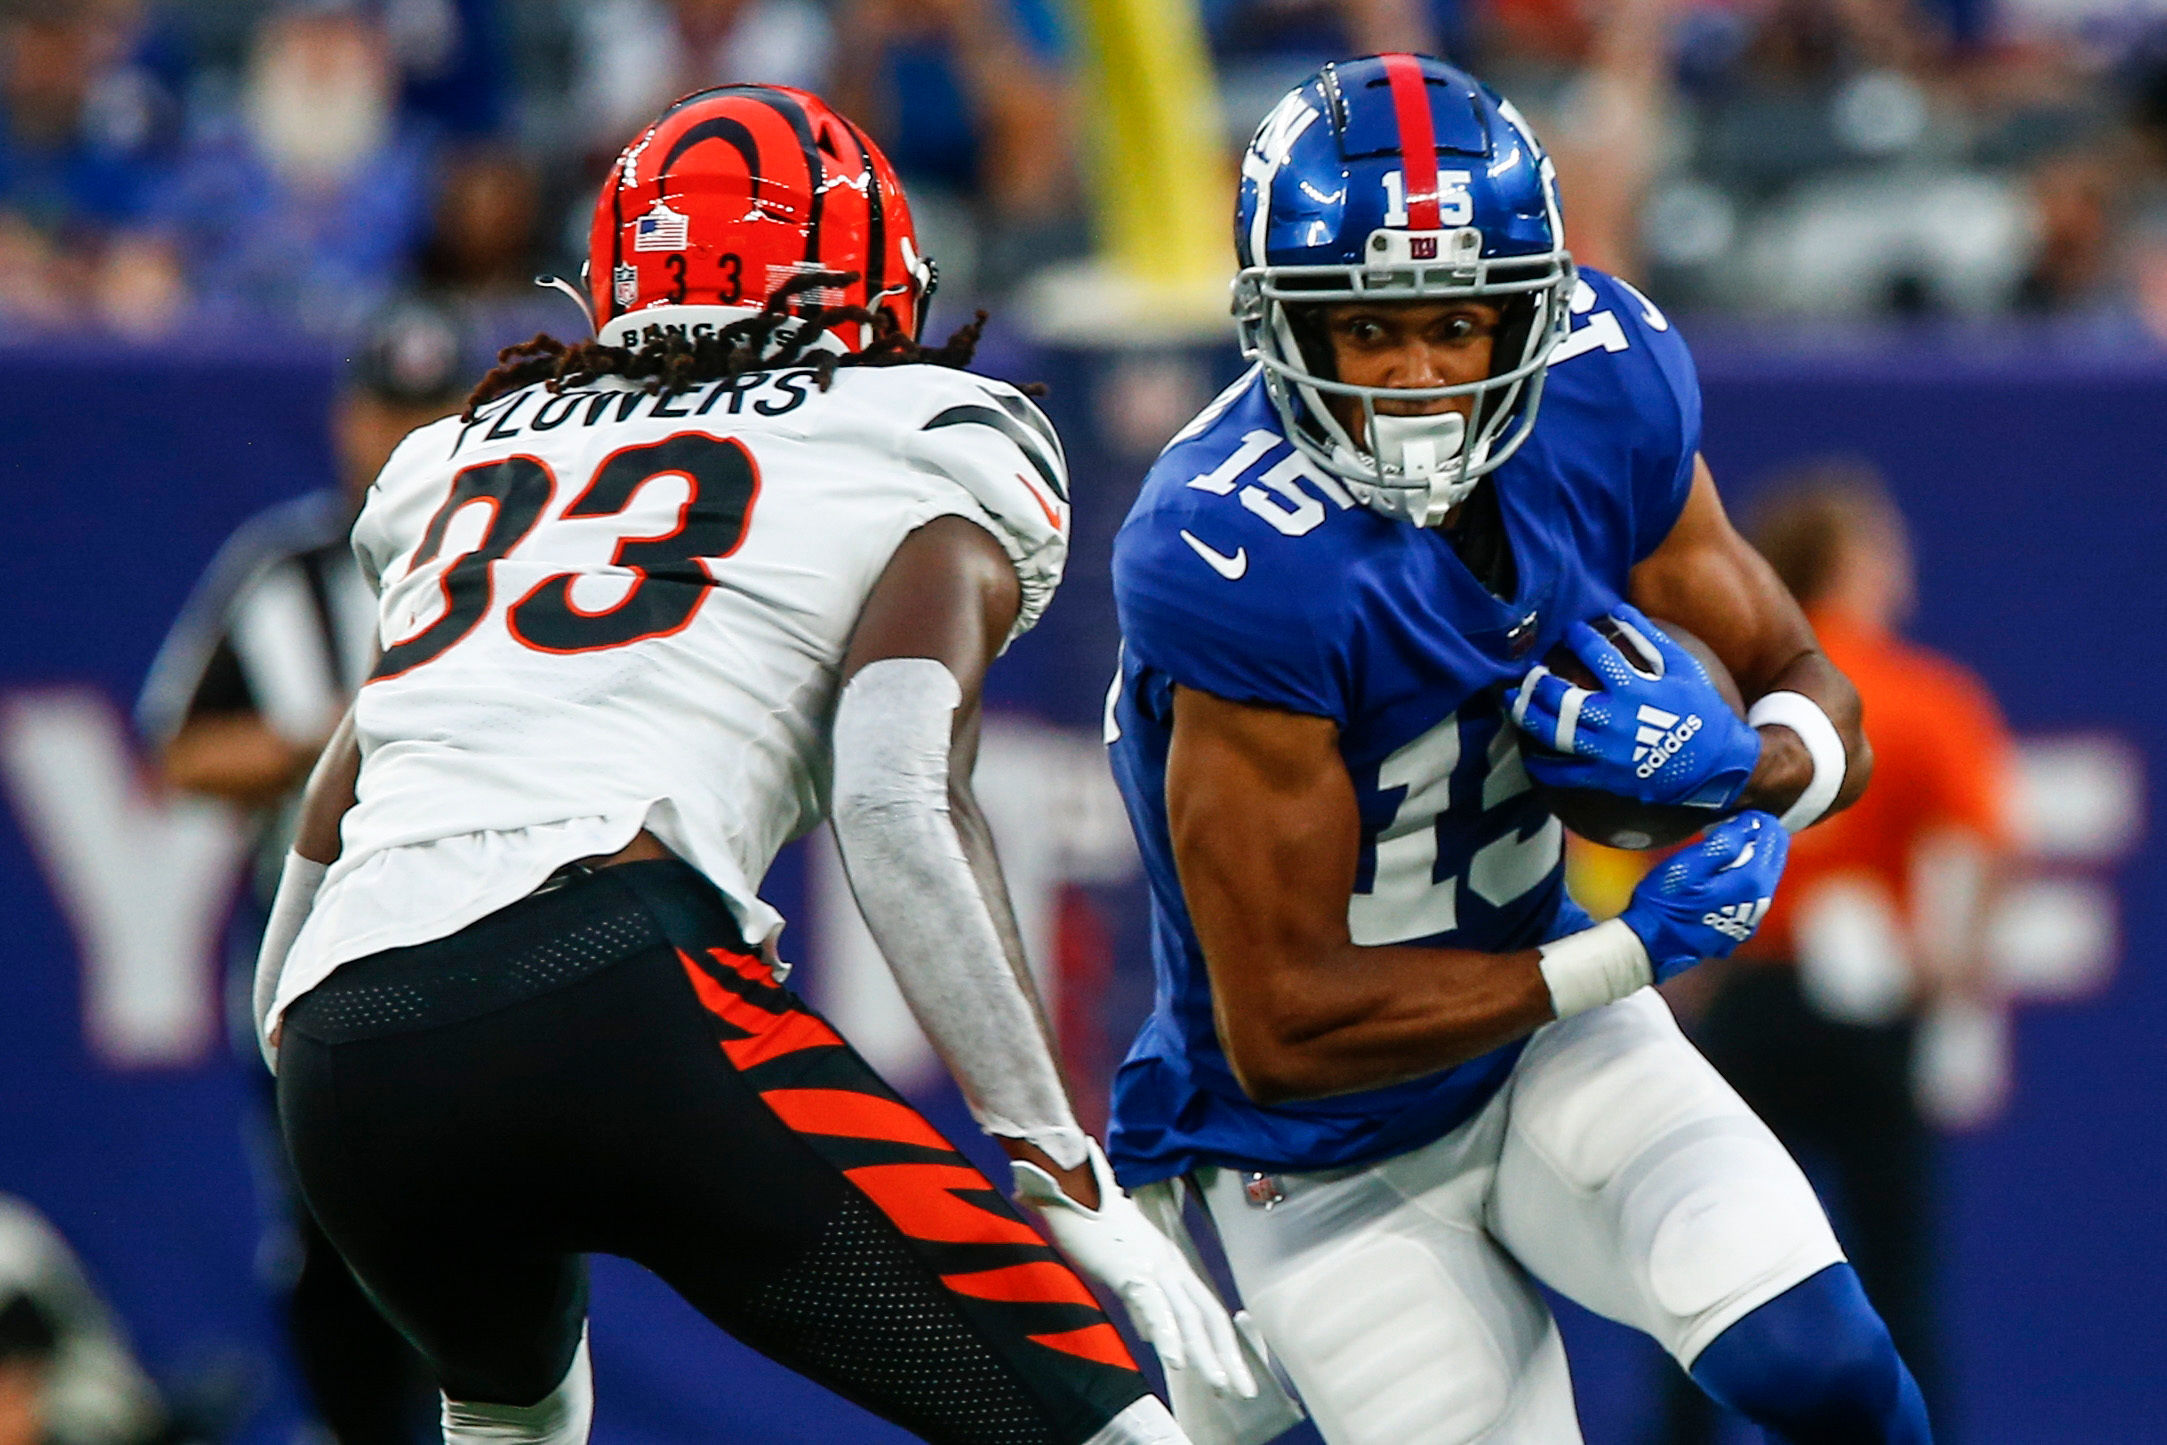 Collin Johnson carted off with leg injury during New York Giants practice